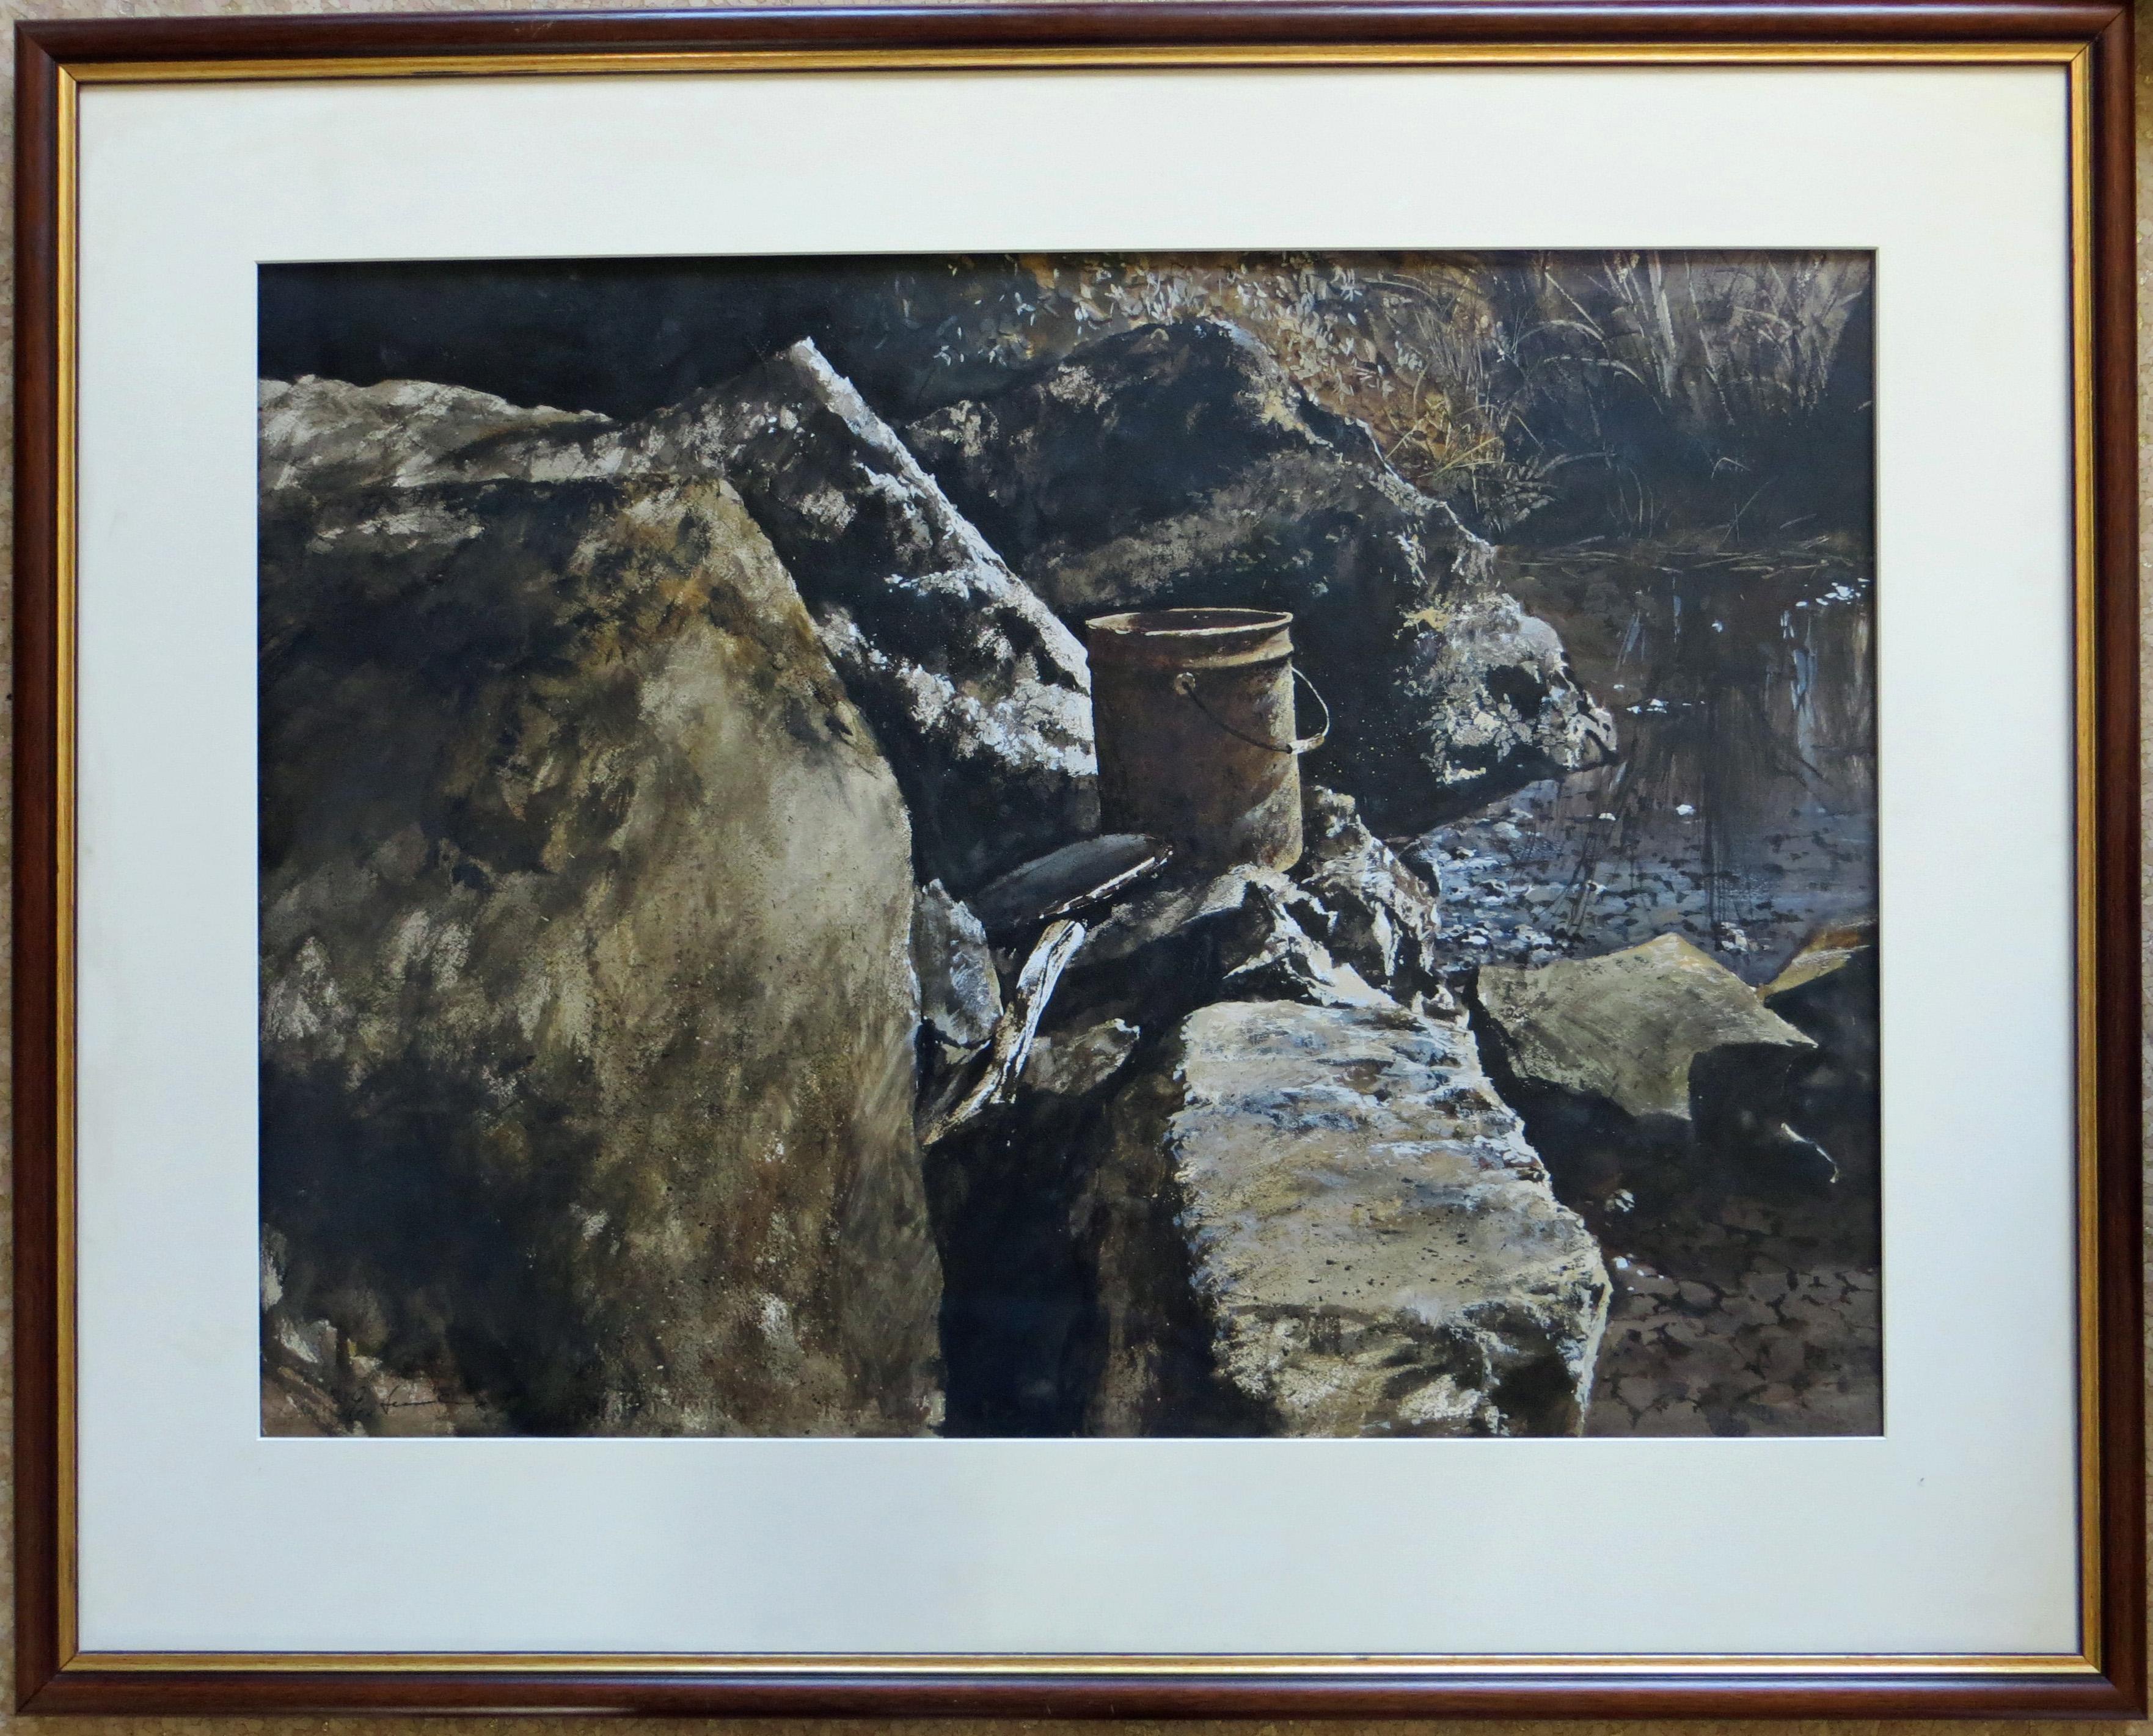 Pail, Boulders, Stream  -American Realism - Painting by Gregory Sumida